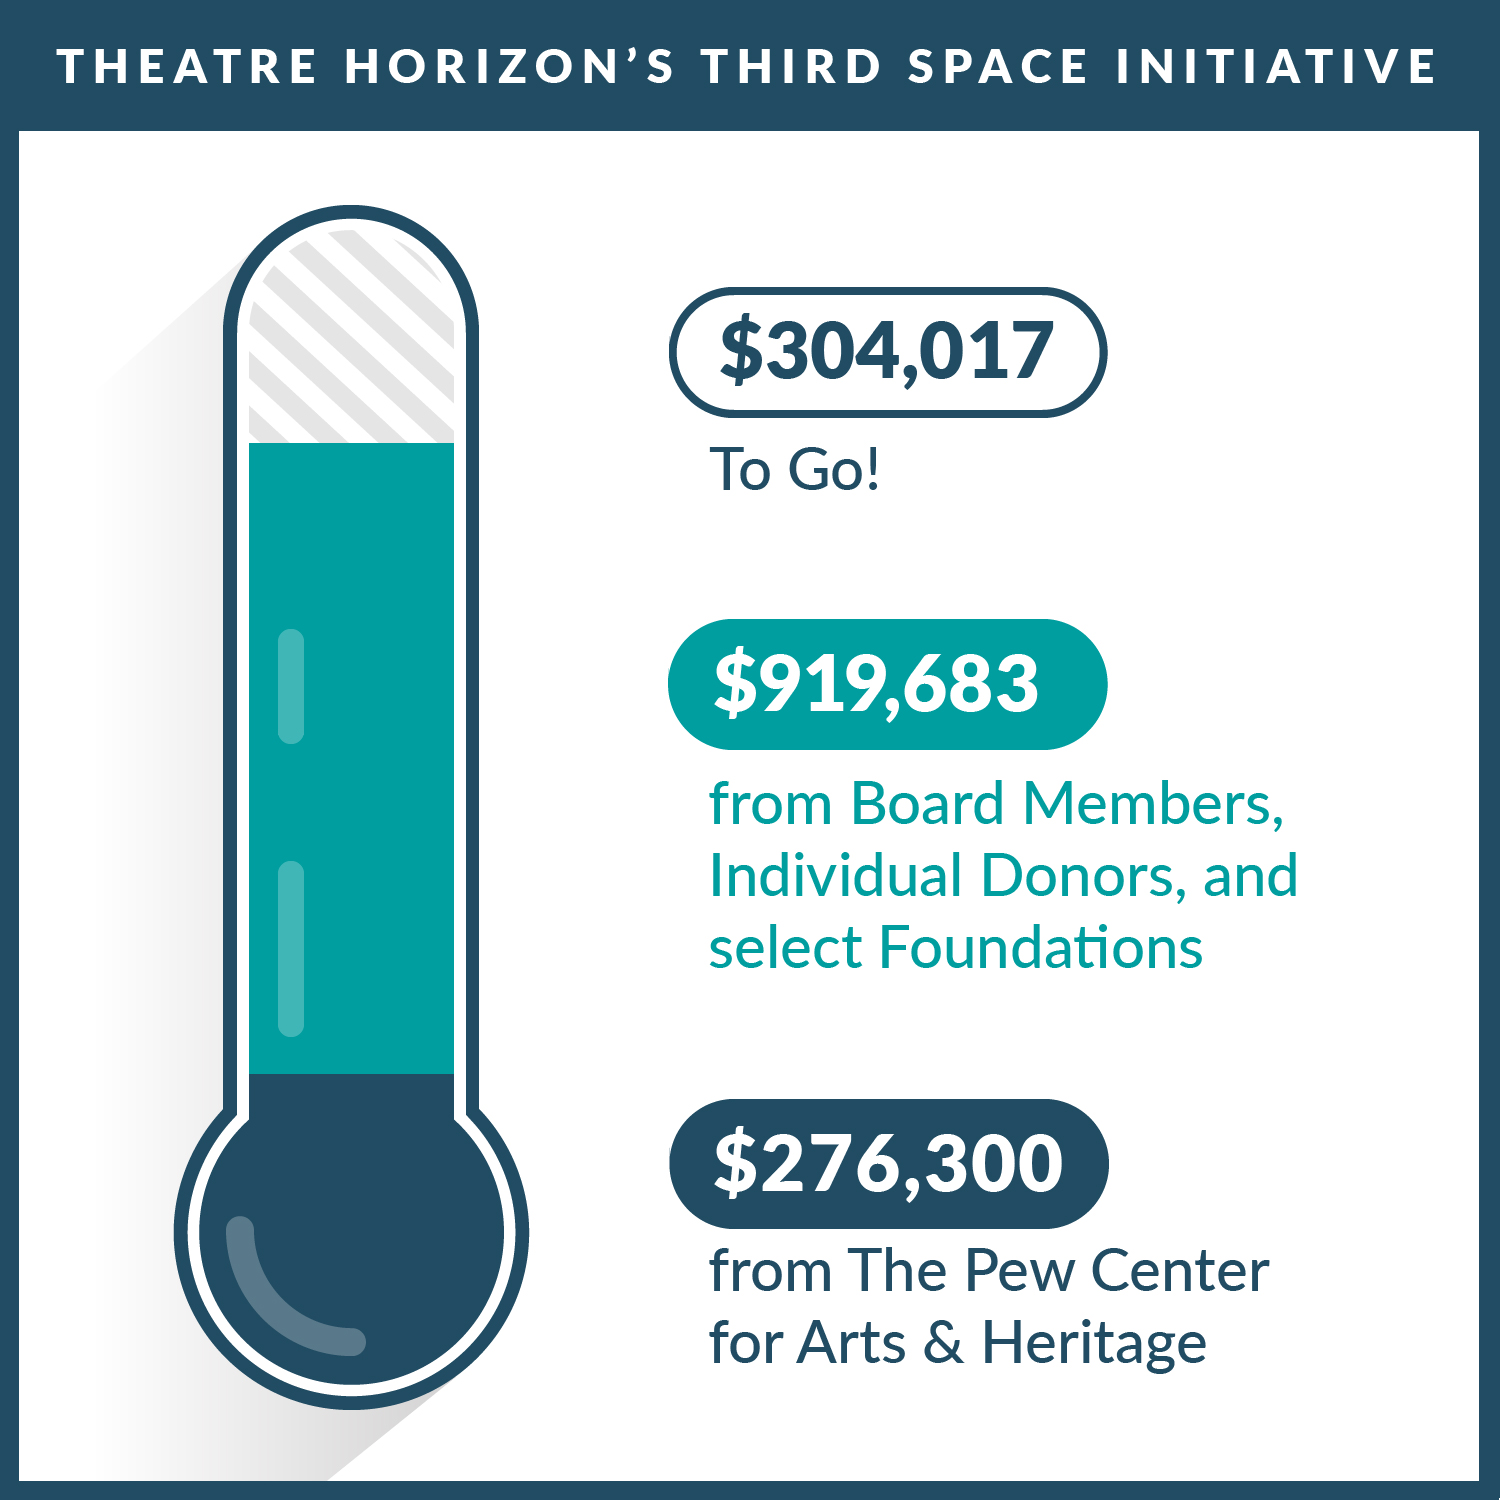 A thermometer describing Theatre Horizon's expanded Third Space Campaign goals. We have $304,017 to go after raising $919,683 from Board Members, Individual Donors, and select foundations and $276,300 from the Pew Center for Arts & Heritage